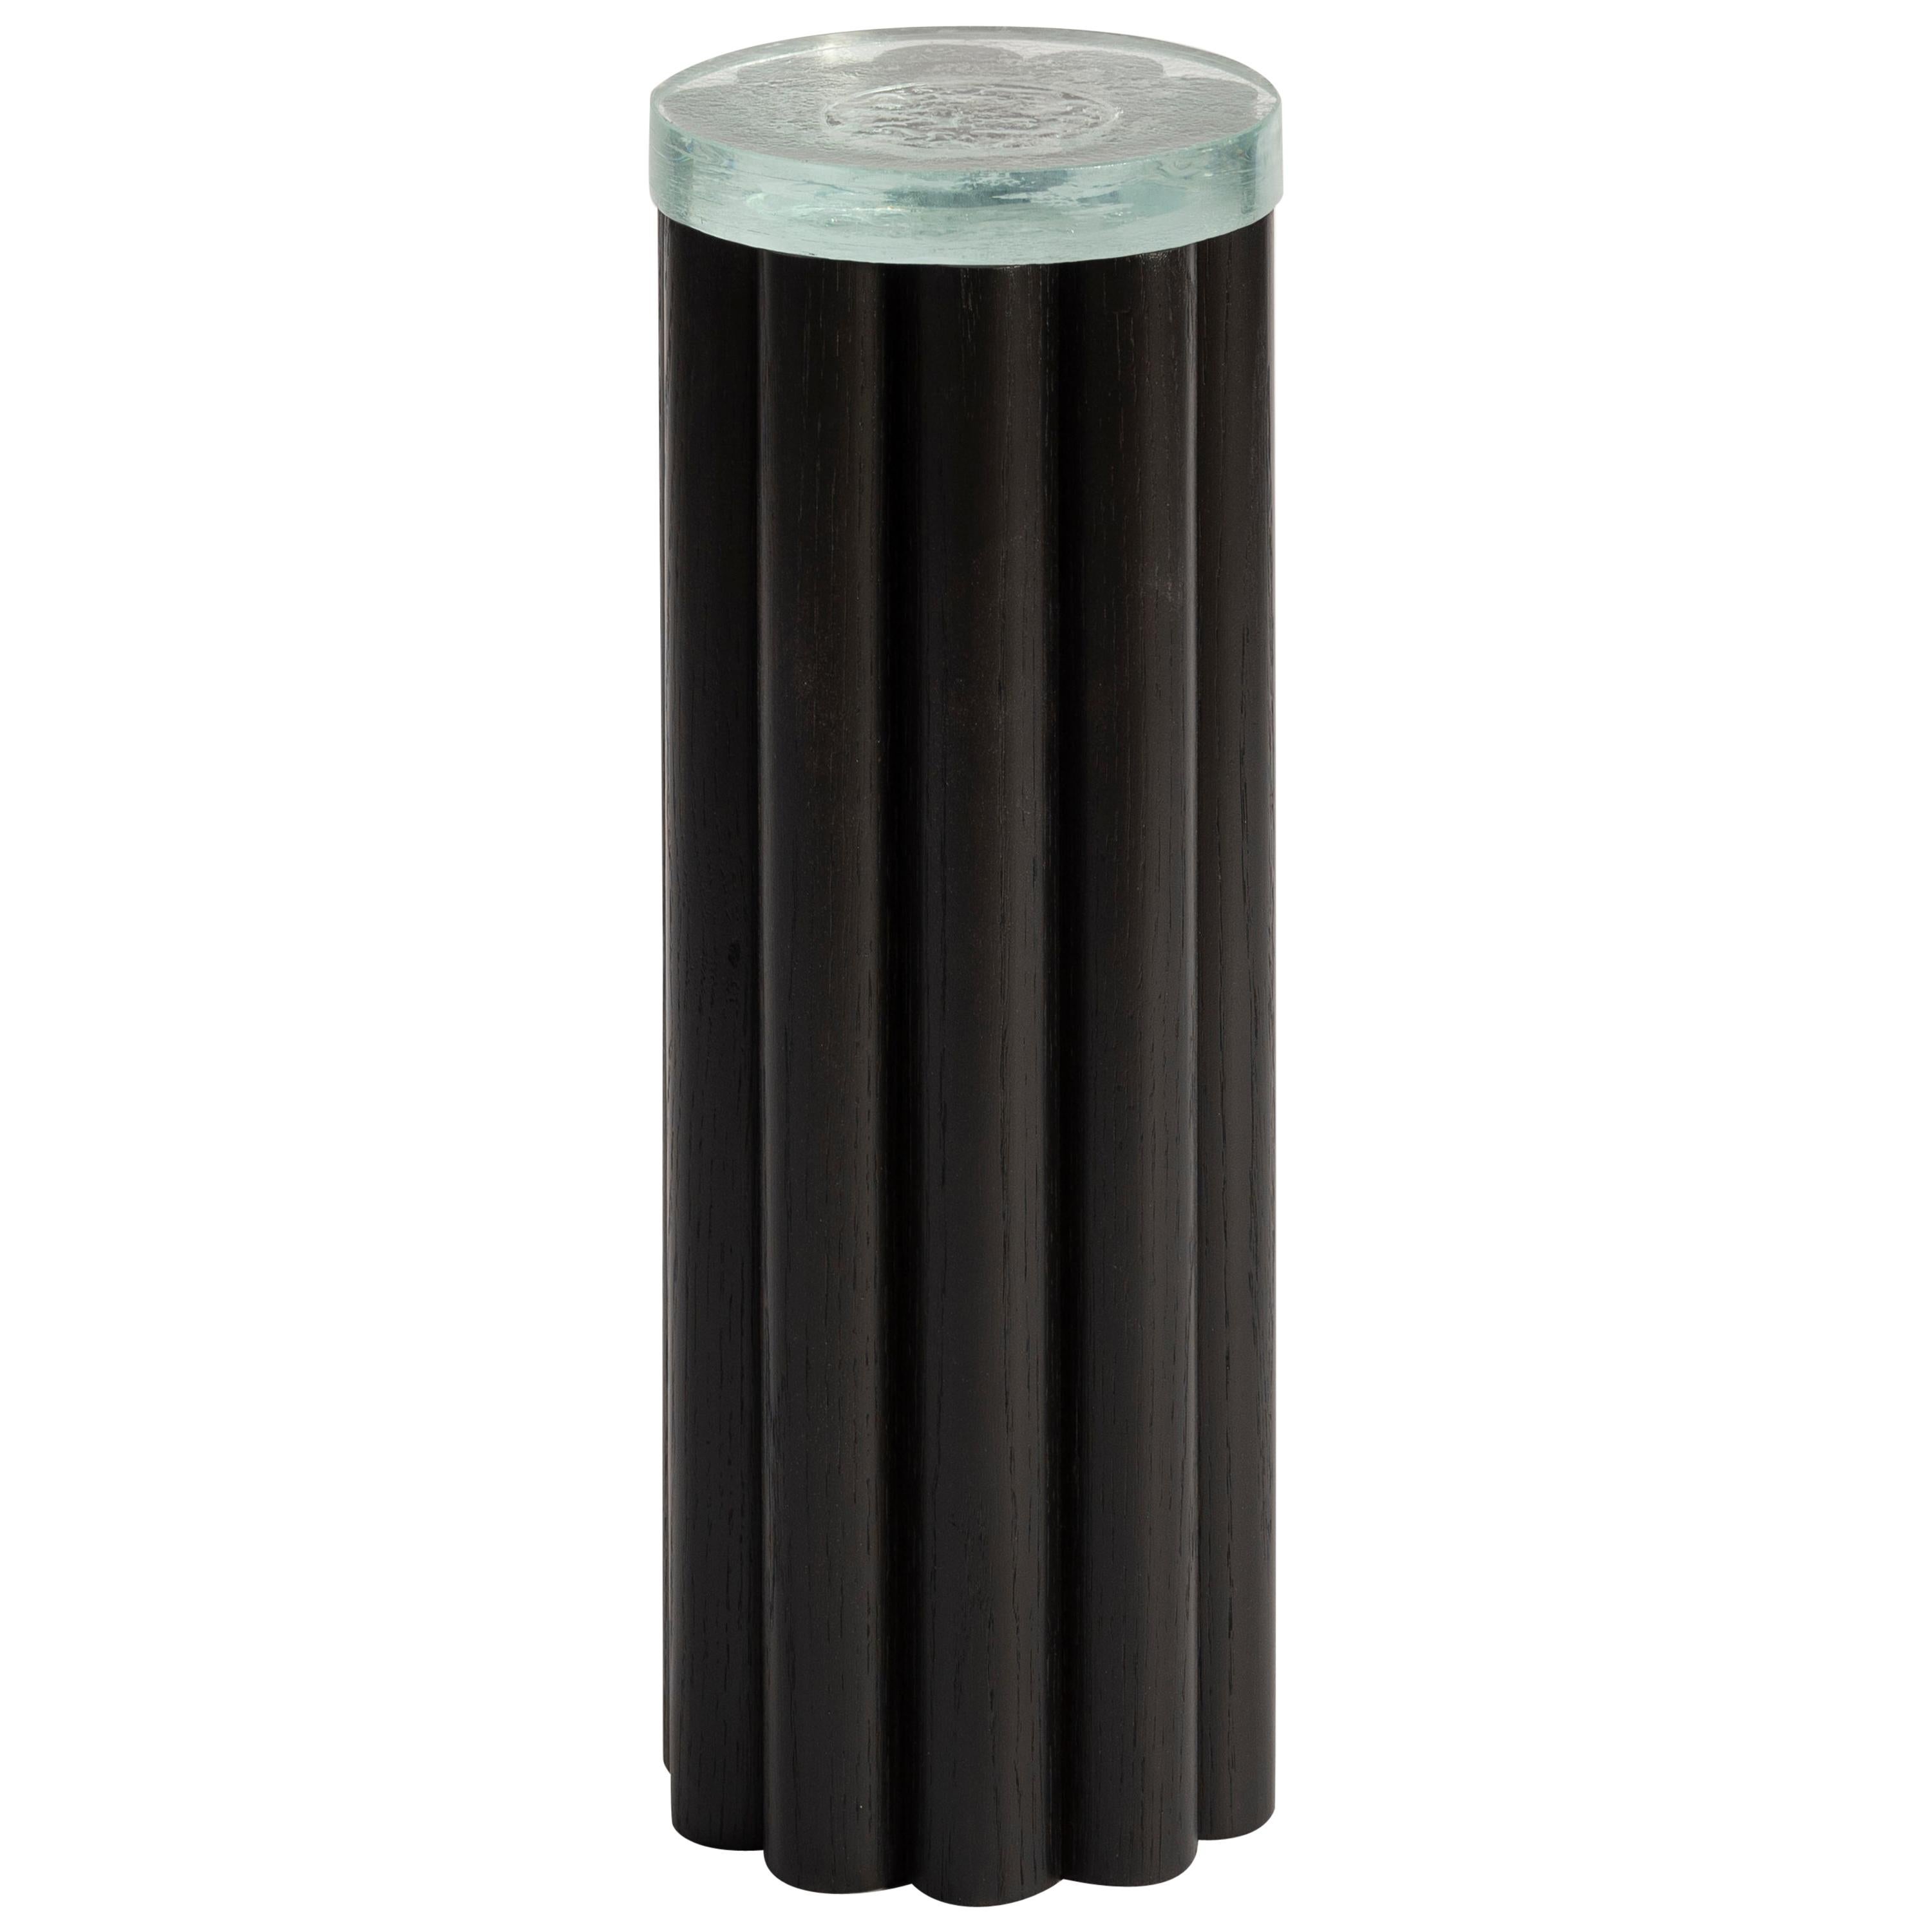 Loto Side Table Tall, Black Oak Wood and Fused Glass